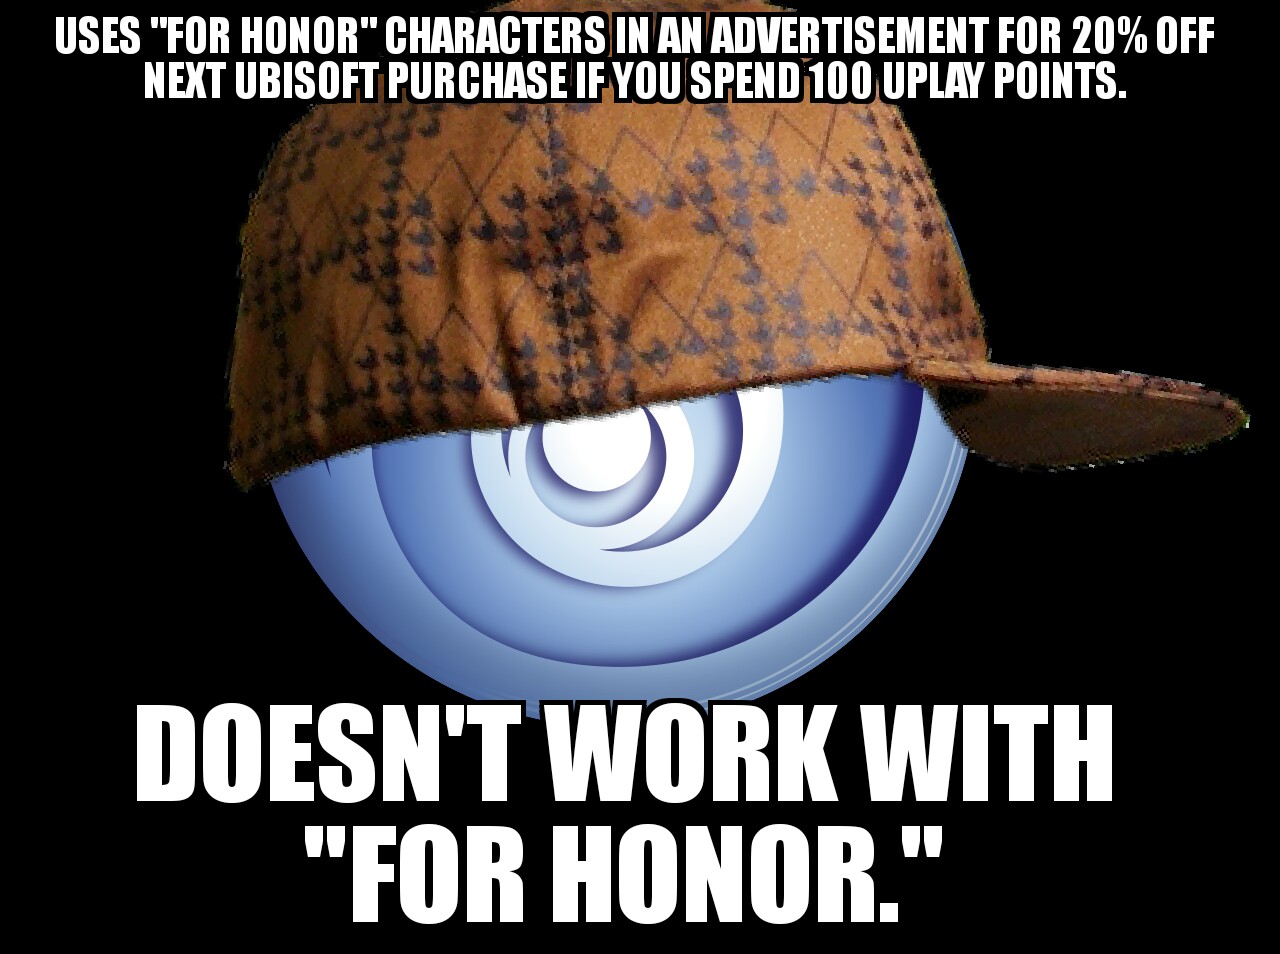 photo caption - Uses "For Honor" Characters In An Advertisement For 20% Off Next Ubisoft Purchase If You Spend 100 Uplay Points. Doesn'T Work With "For Honor."